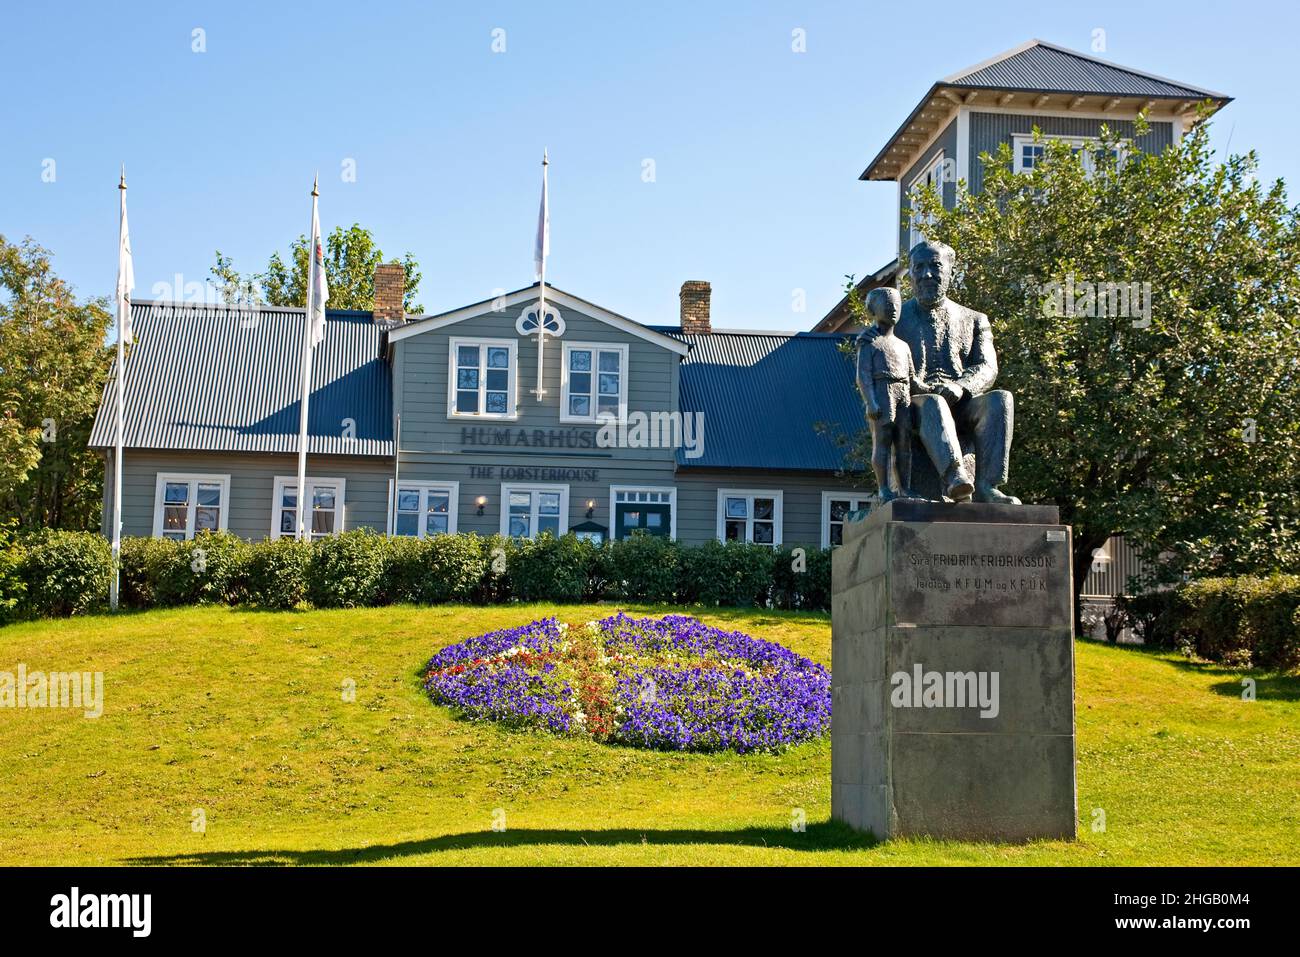 Typical house, Old Town, Reykjavik, Iceland Stock Photo